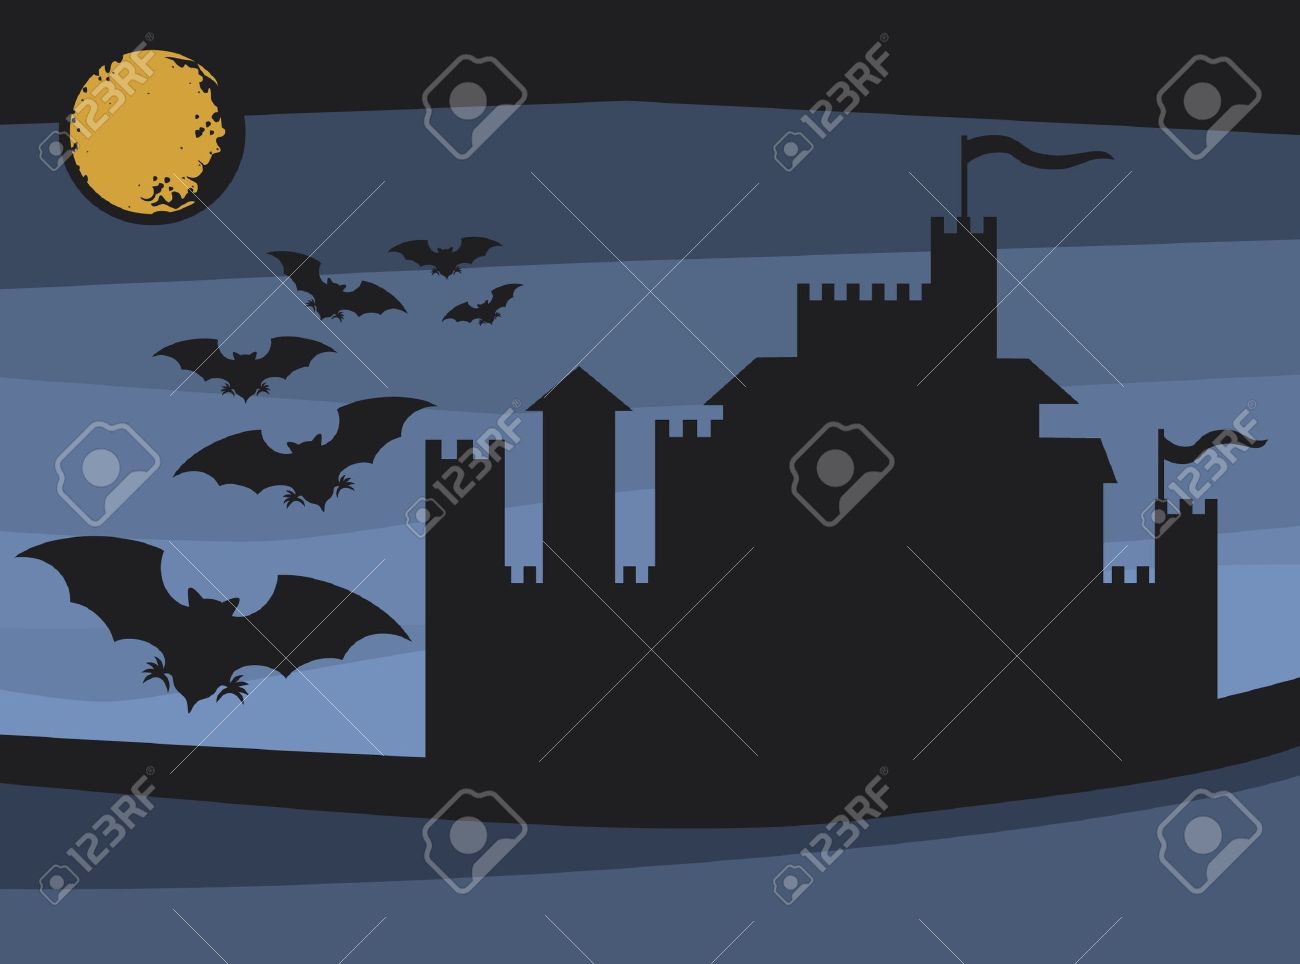 Dracula's Castle clipart #13, Download drawings